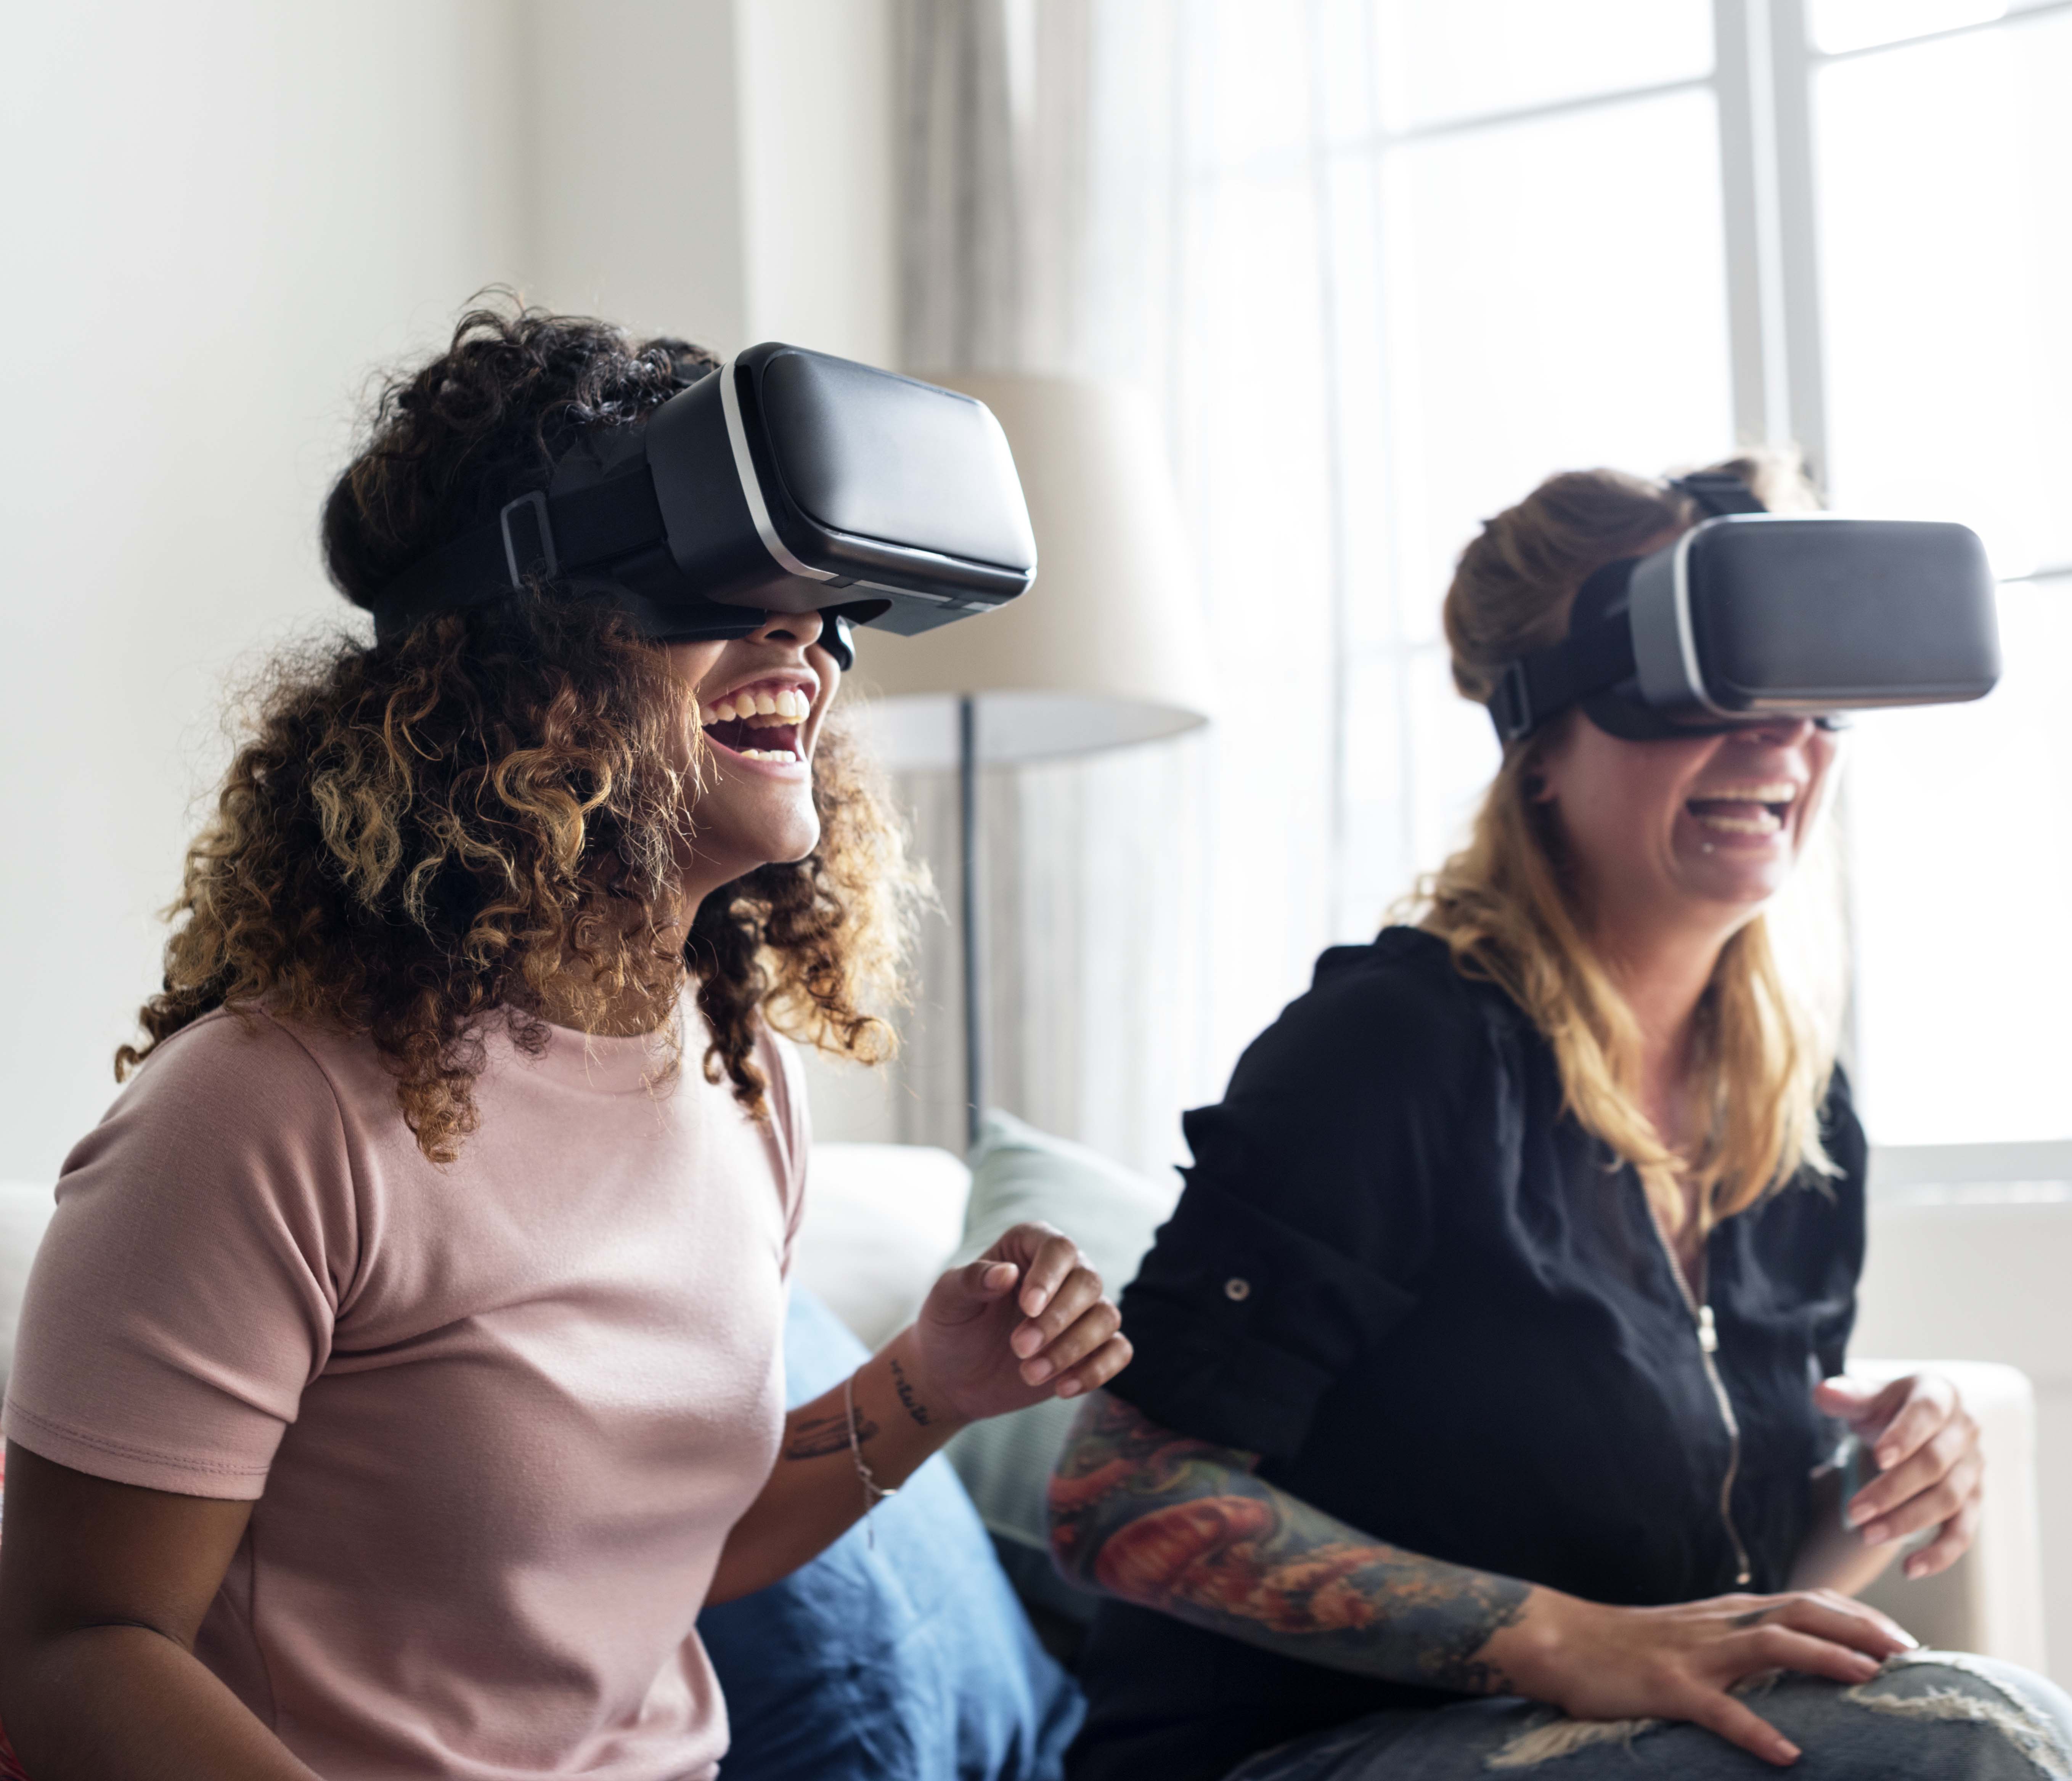 Two women on VR headsets